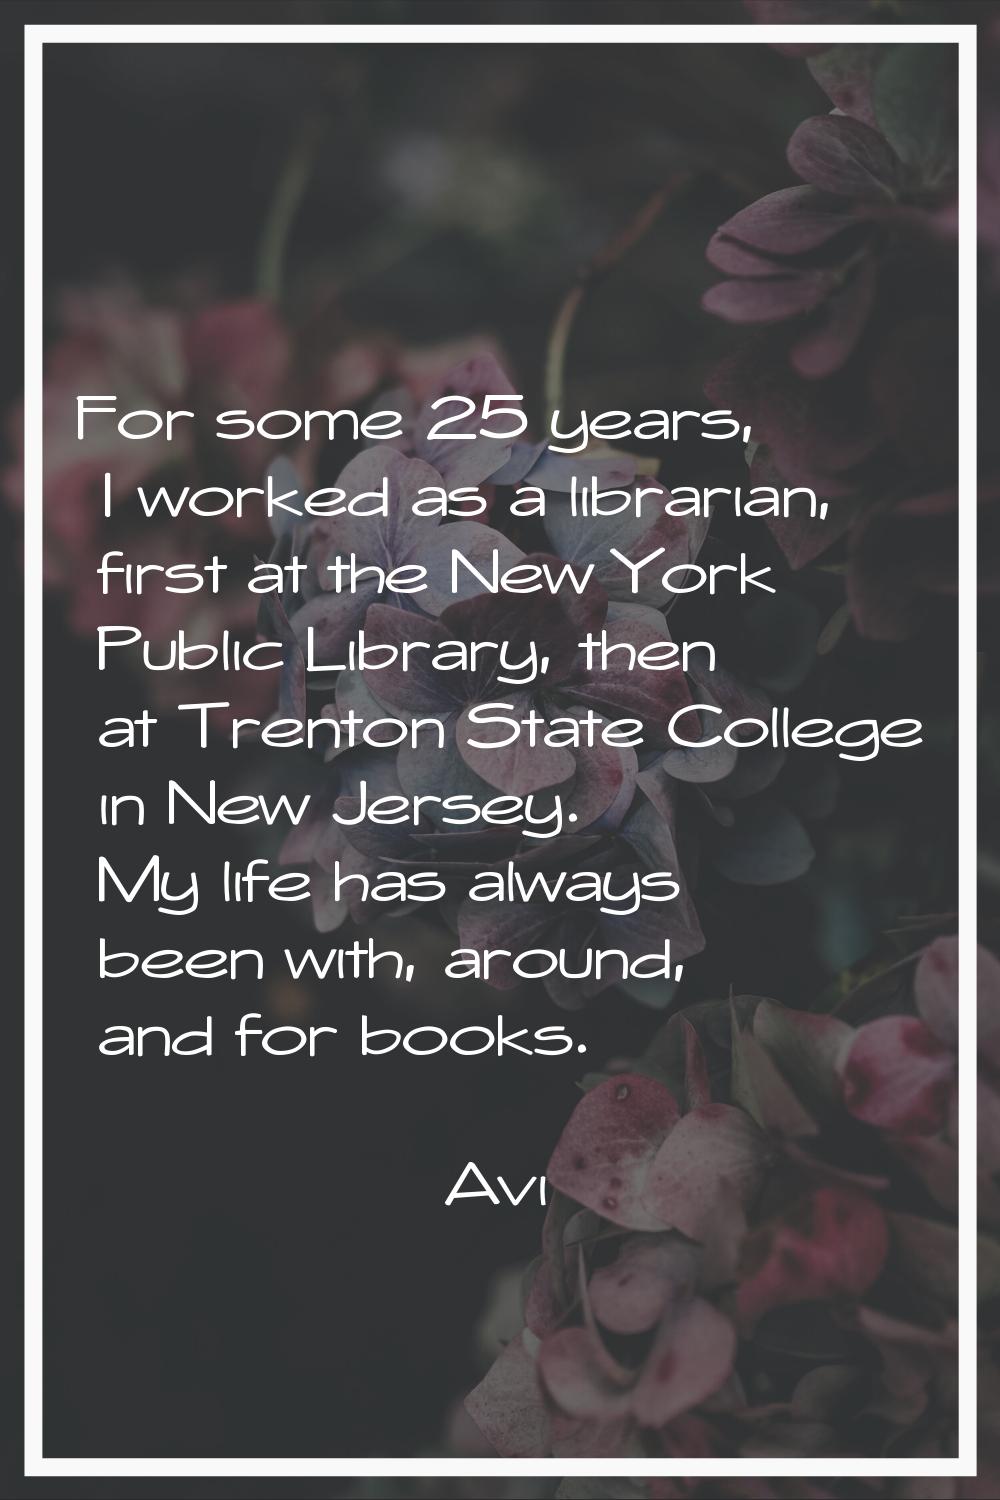 For some 25 years, I worked as a librarian, first at the New York Public Library, then at Trenton S